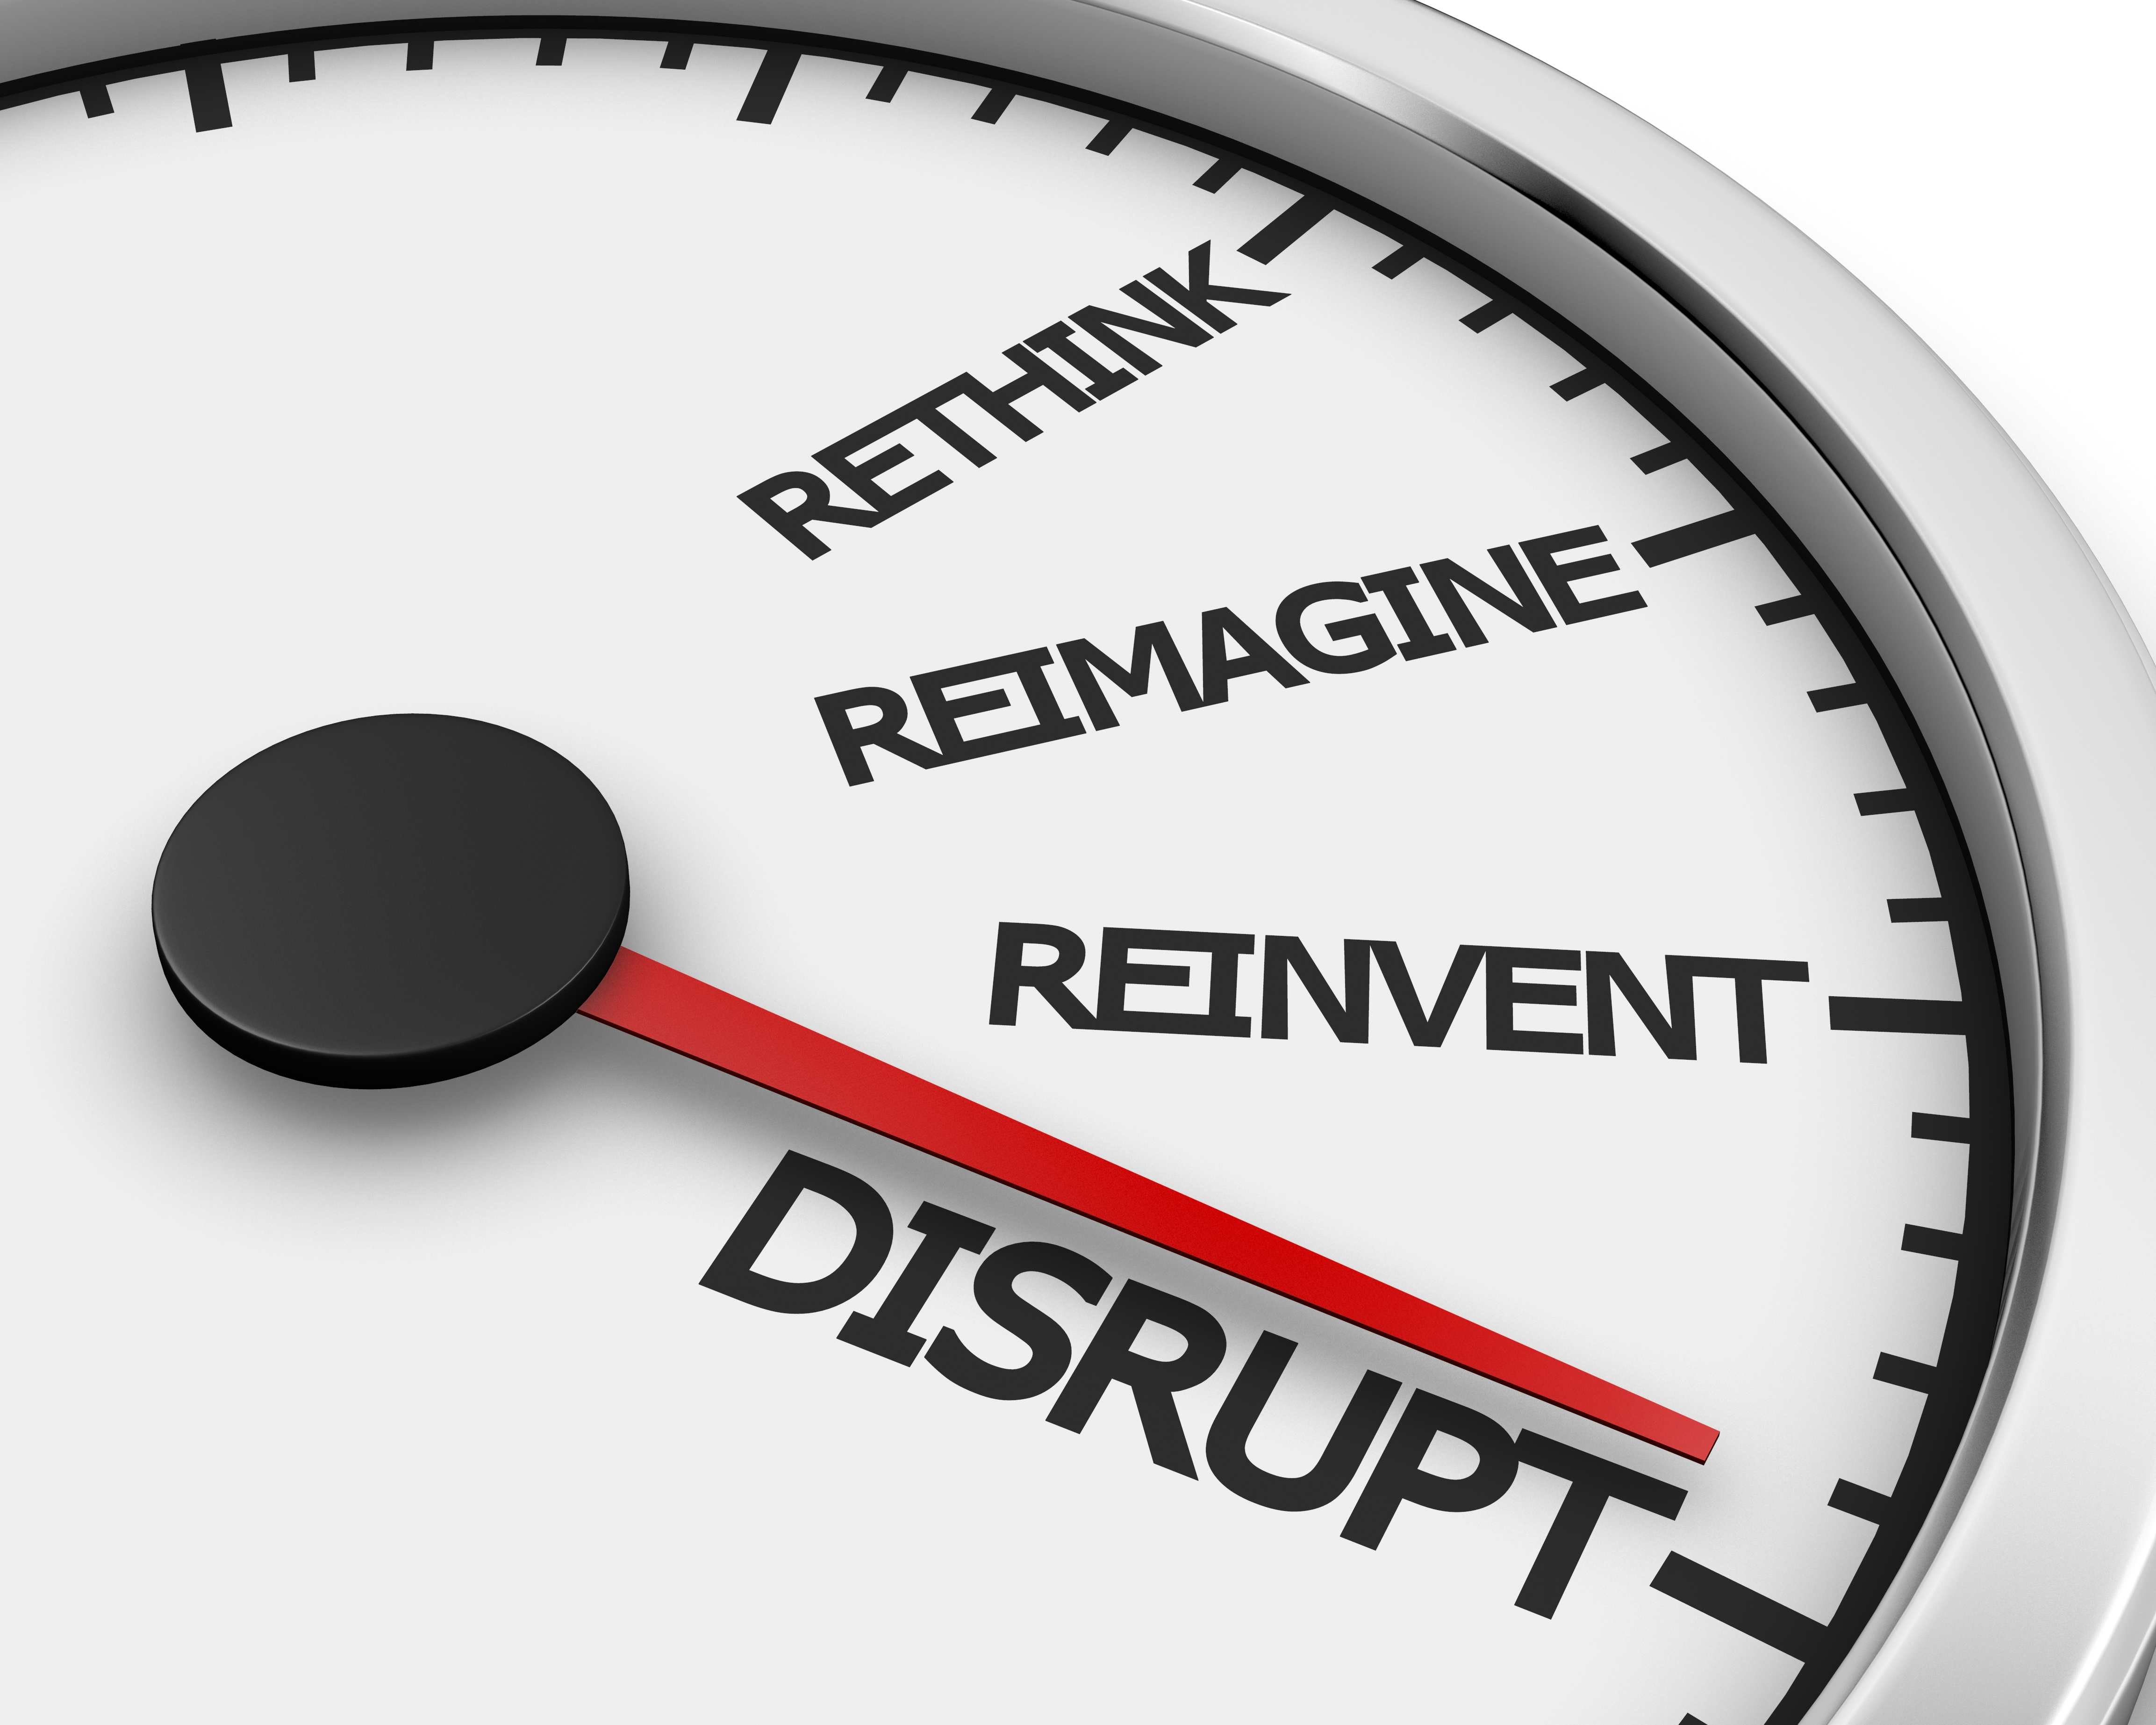 Meter from Rethink to Disrupt